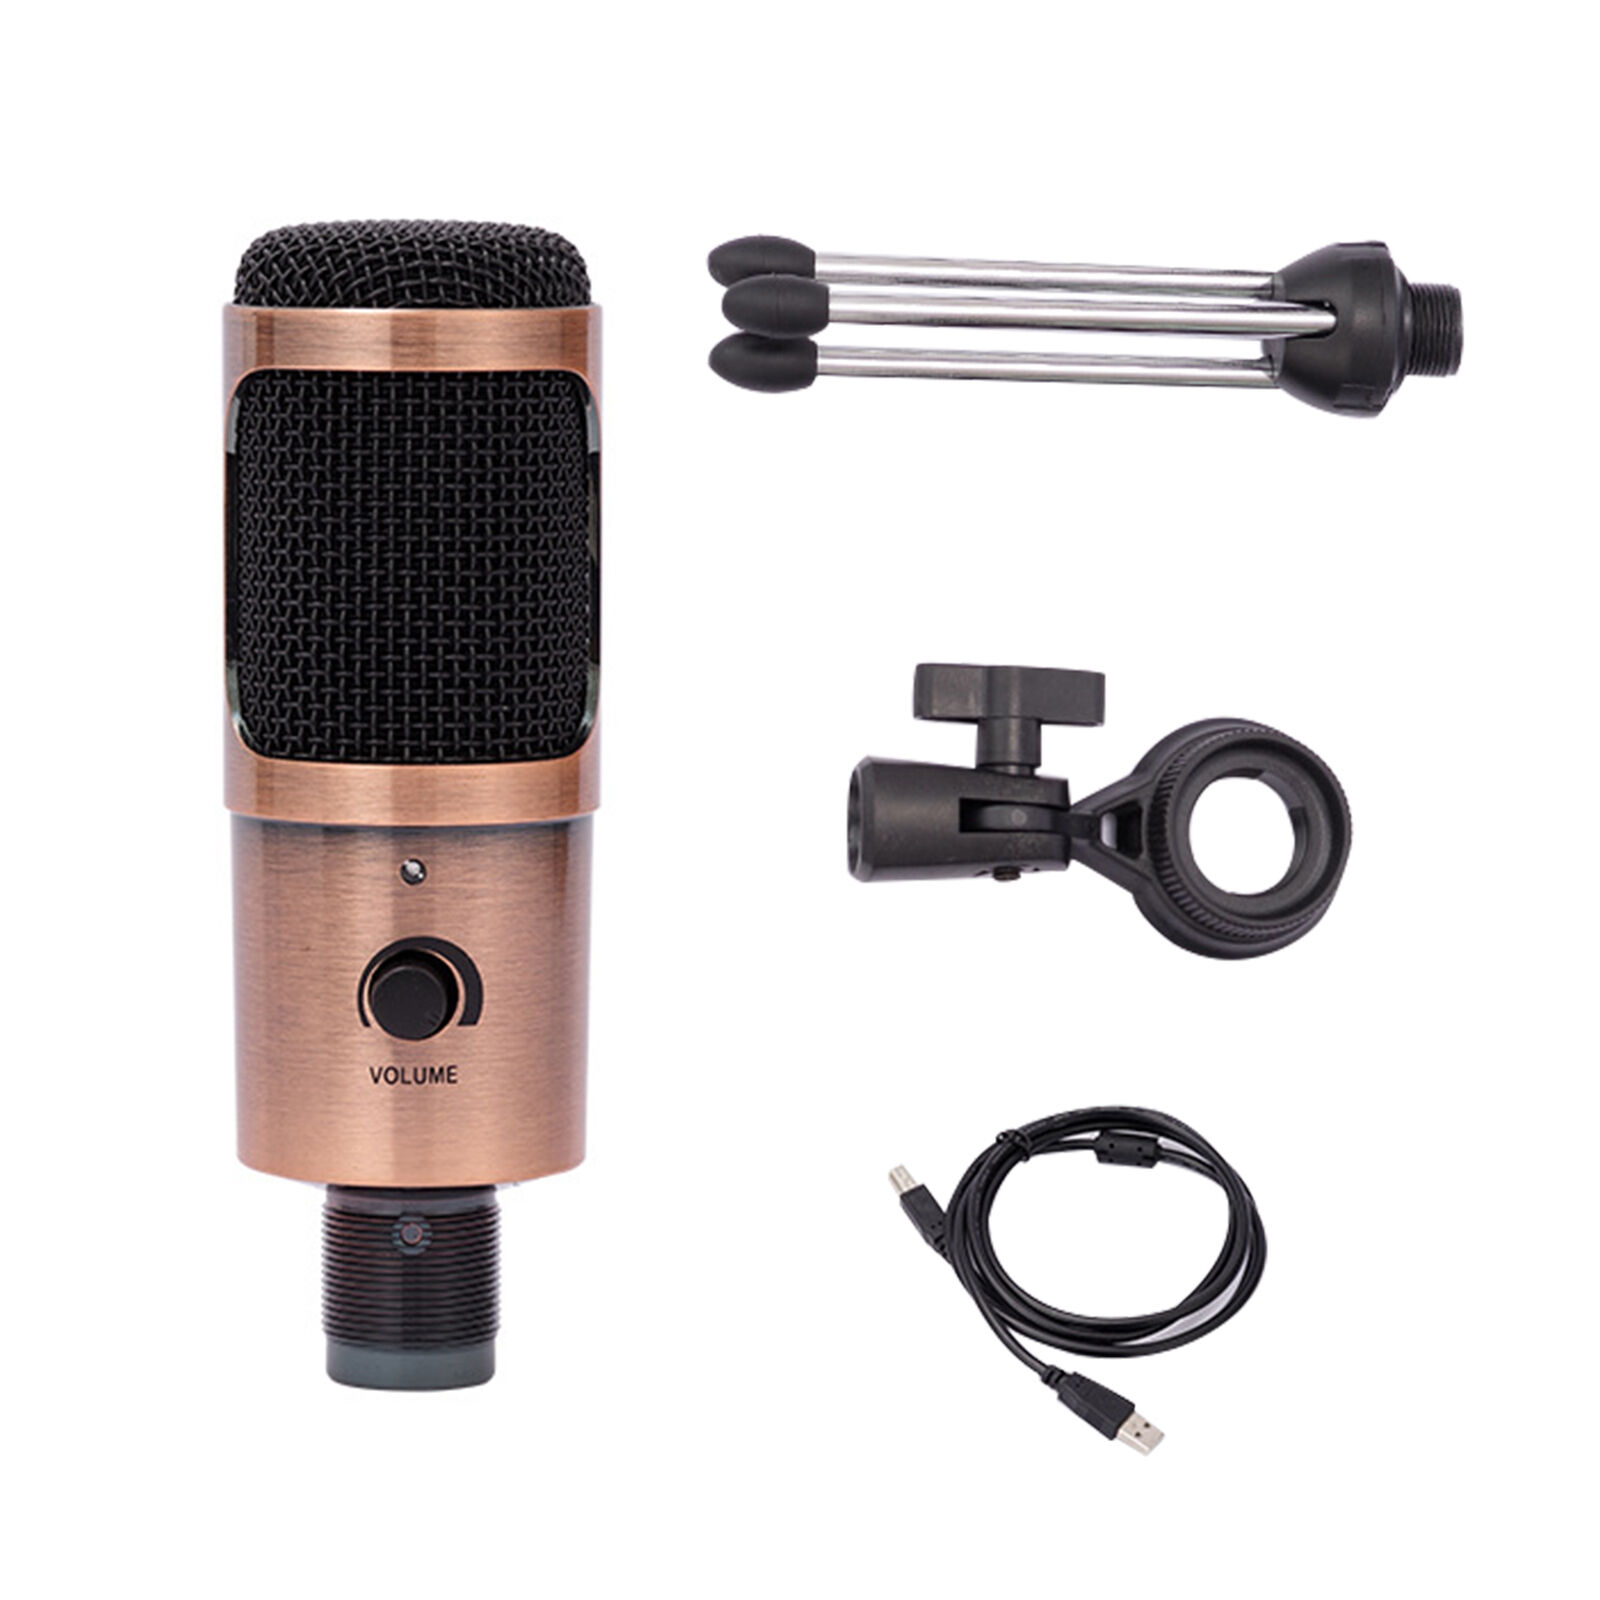 Wired Microphone Wired Widely Compatible Professional Usb Microphone Portable